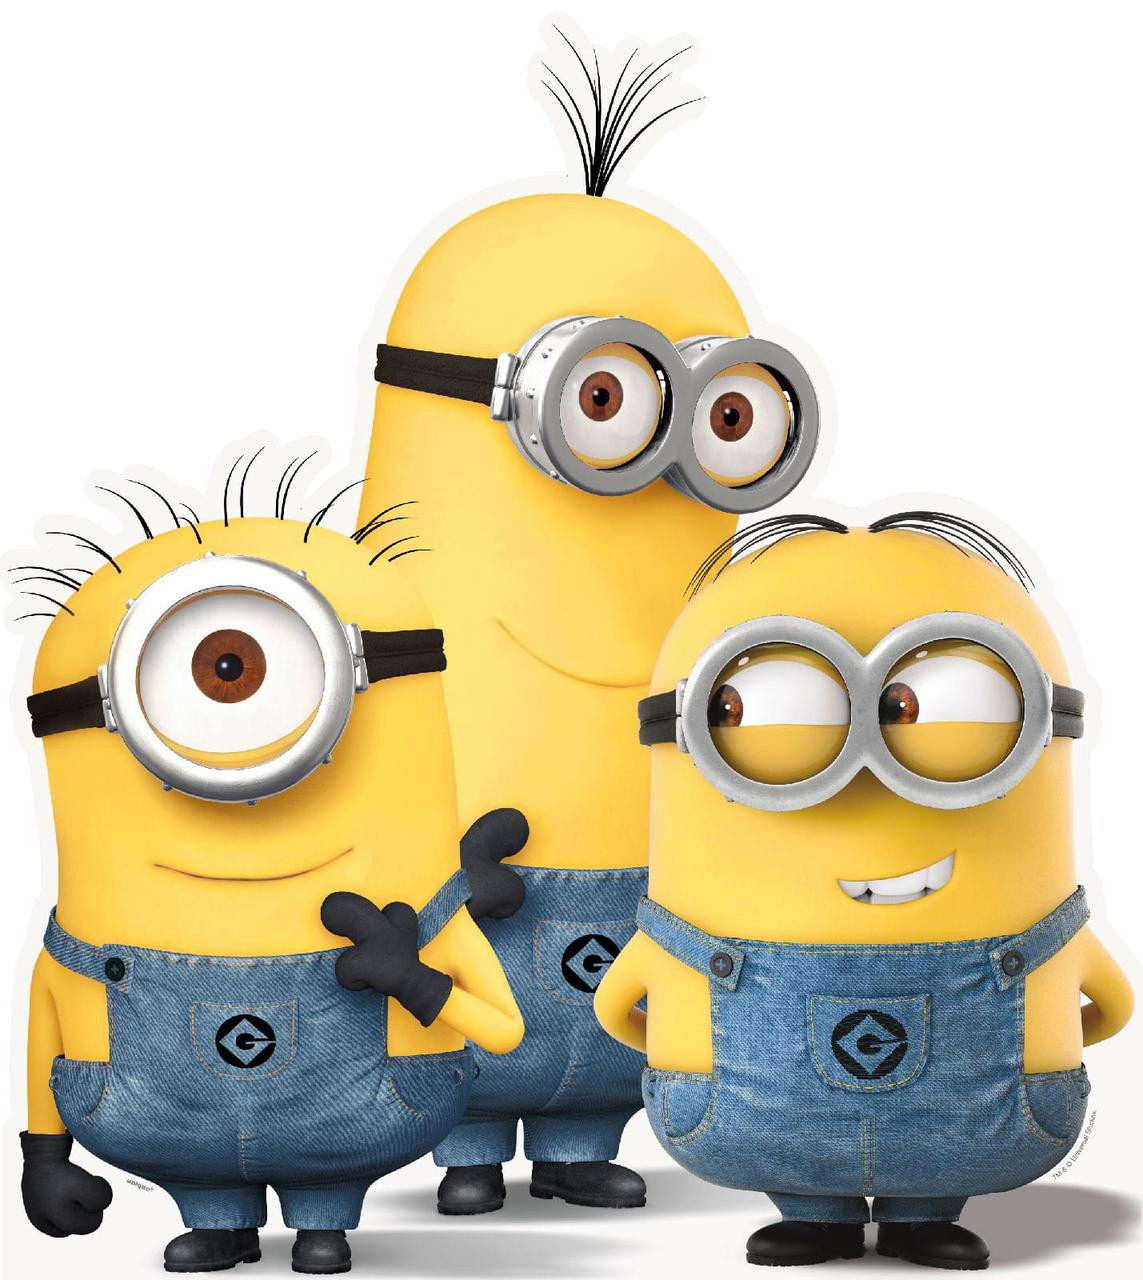 Train your sketching skills having fun with the Minions !